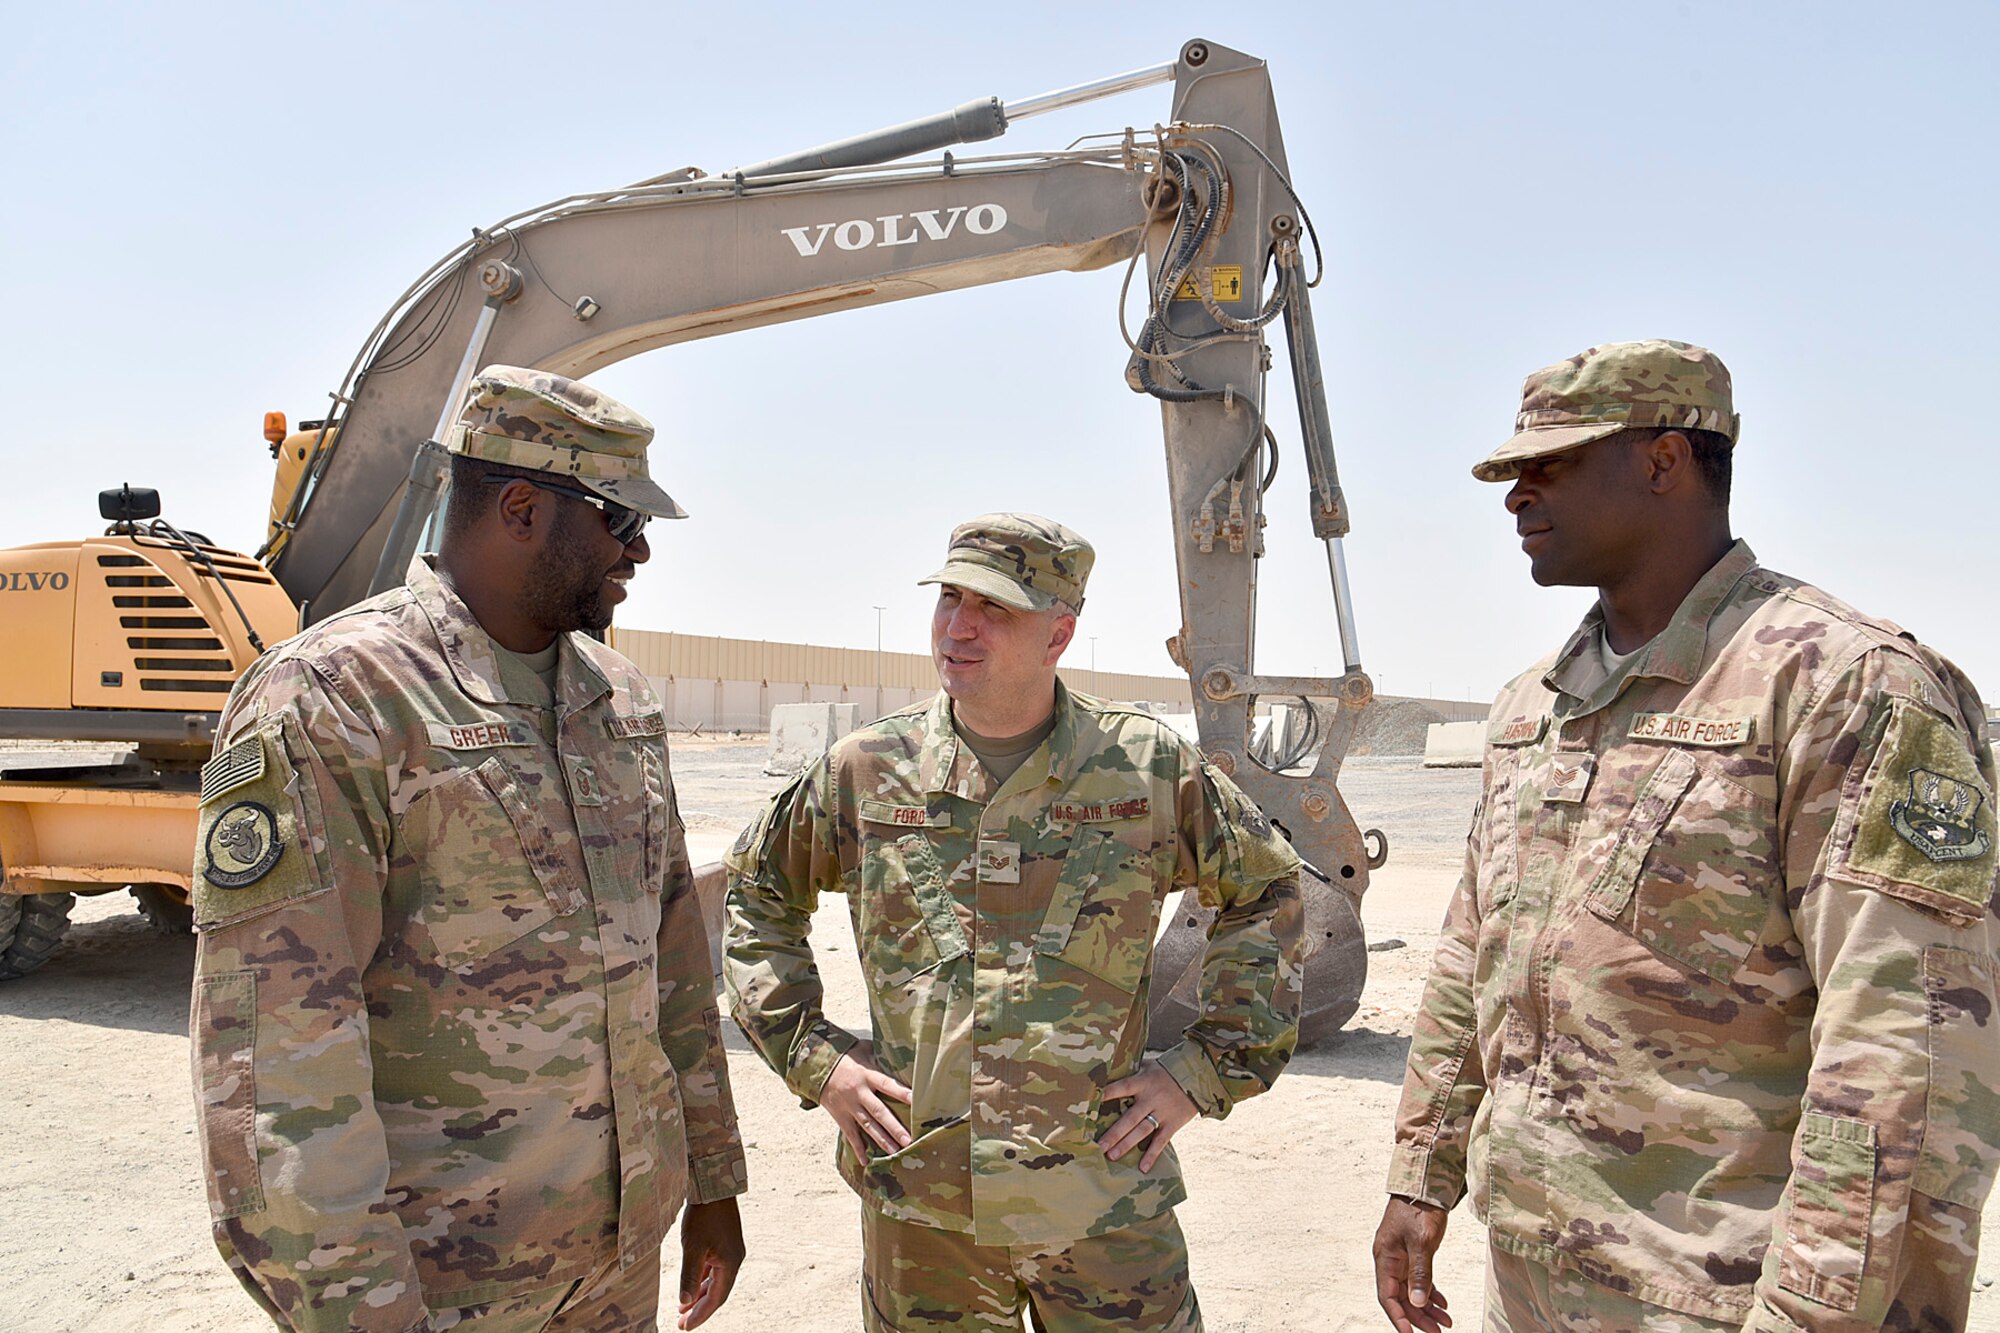 Staff Sgt. Christopher Ford, Equal Opportunity noncommissioned officer in charge, 379th Air Expeditionary Wing, speaks with members of the 1st Expeditionary Civil Engineering Group after conducting one-on-on interviews with the group at Al Dhafra Air Base, United Arab Emirates, Sept. 13, 2018. The mission of EO includes enforcing a zero tolerance policy for unlawful discrimination as well as fostering positive human relations environments across squadrons, groups and wings.